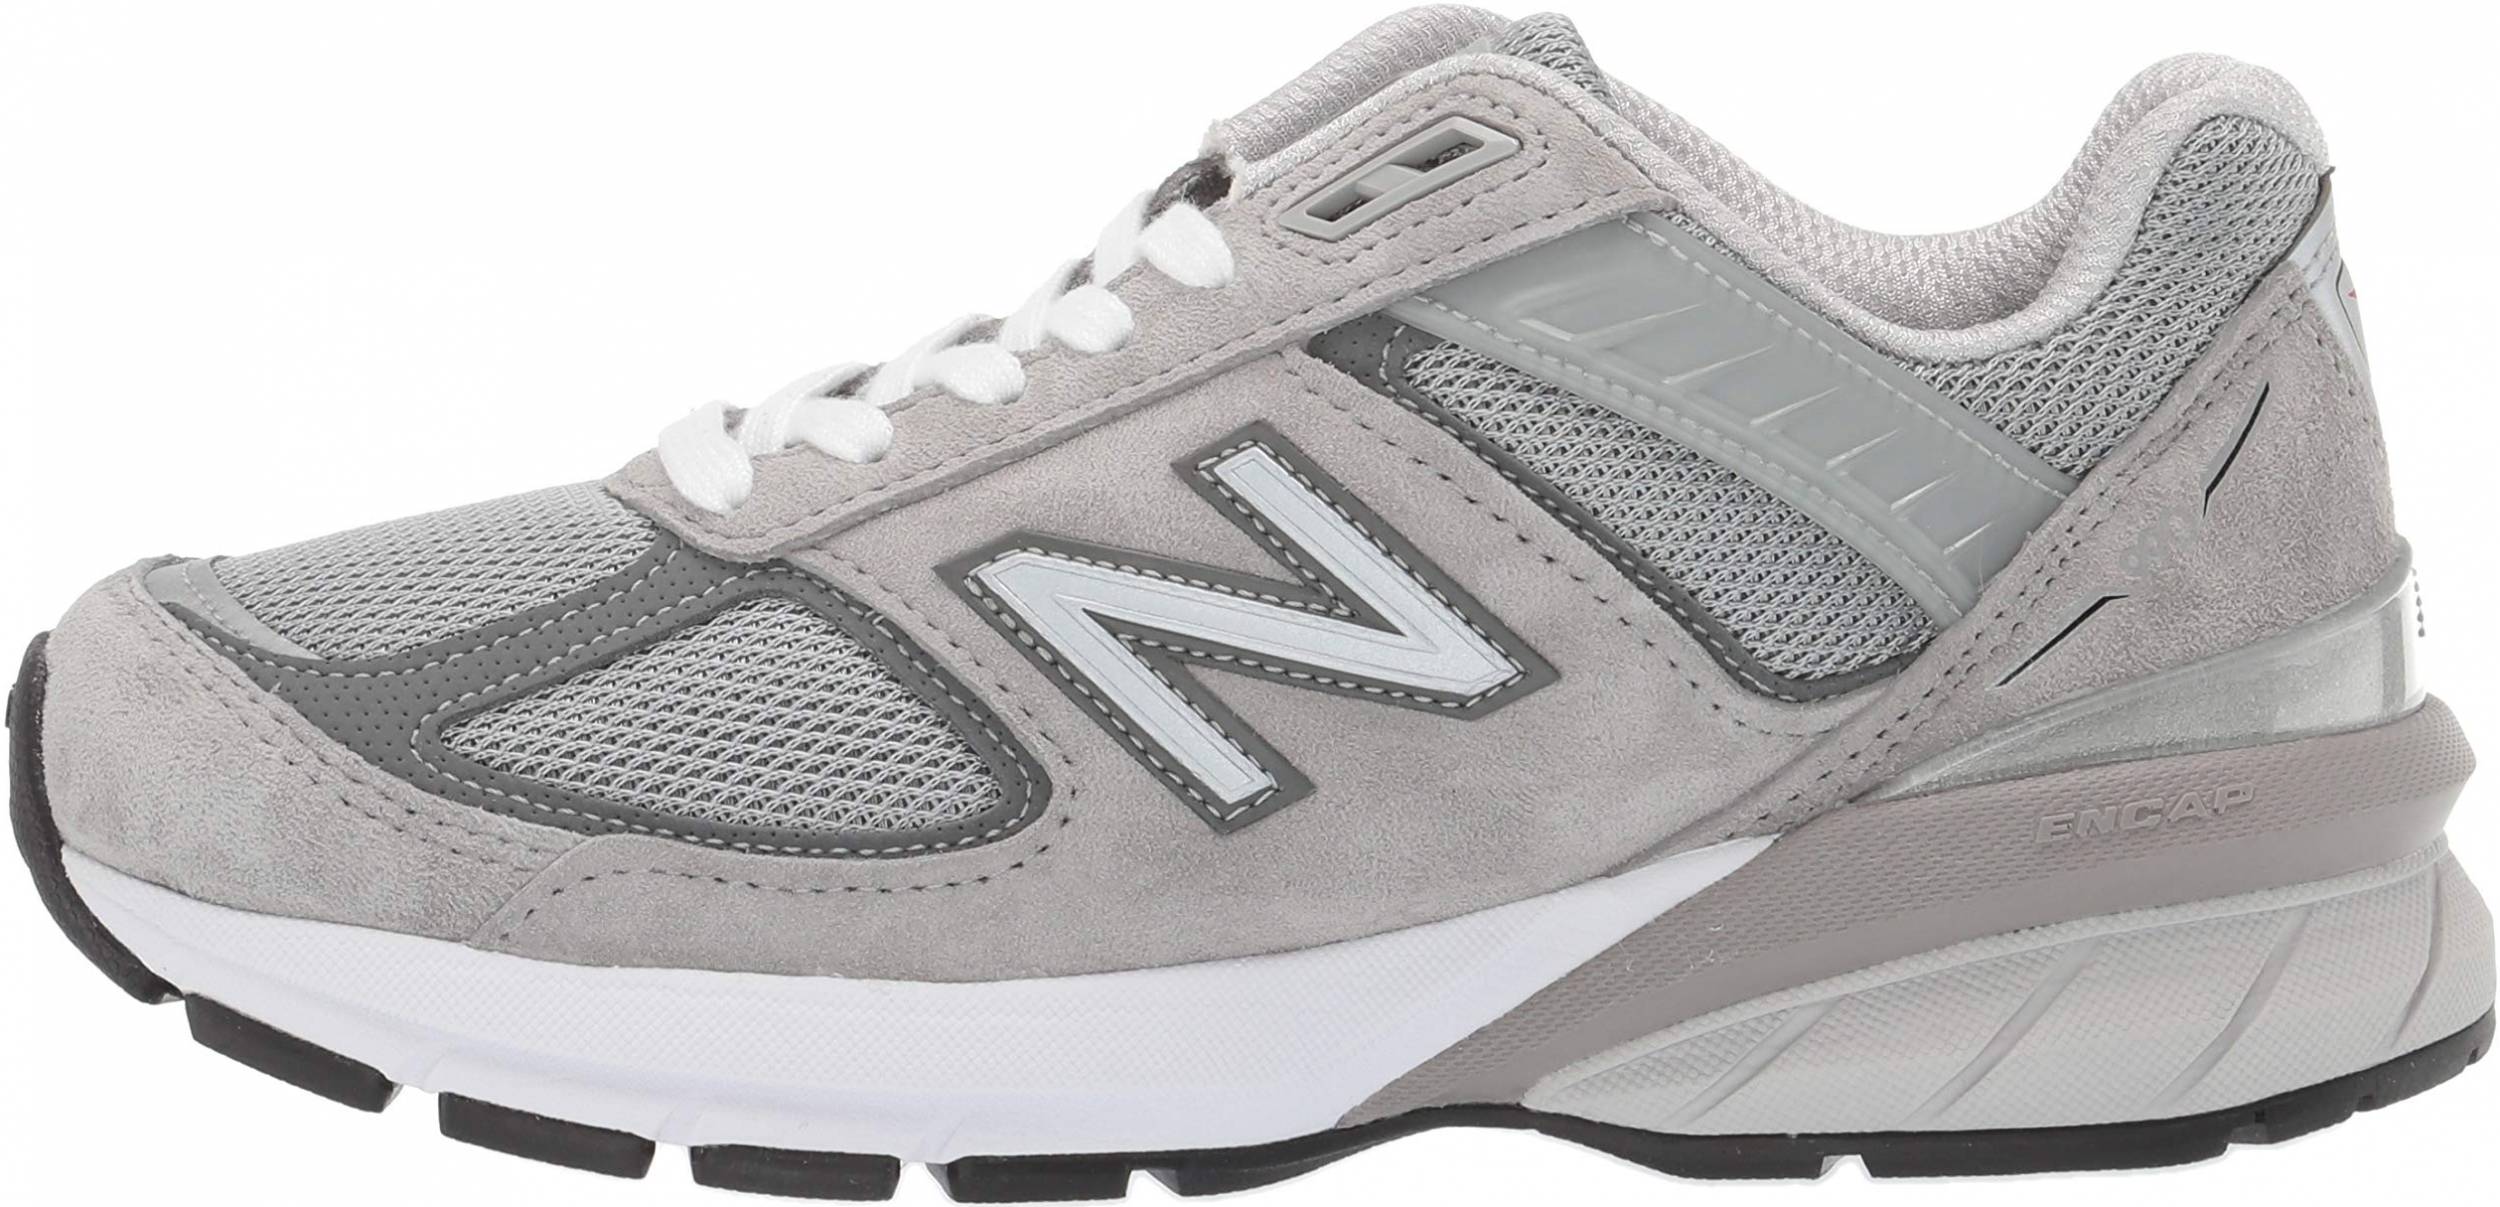 New Balance 990 v5 sneakers in 4 colors (only $175) | RunRepeat